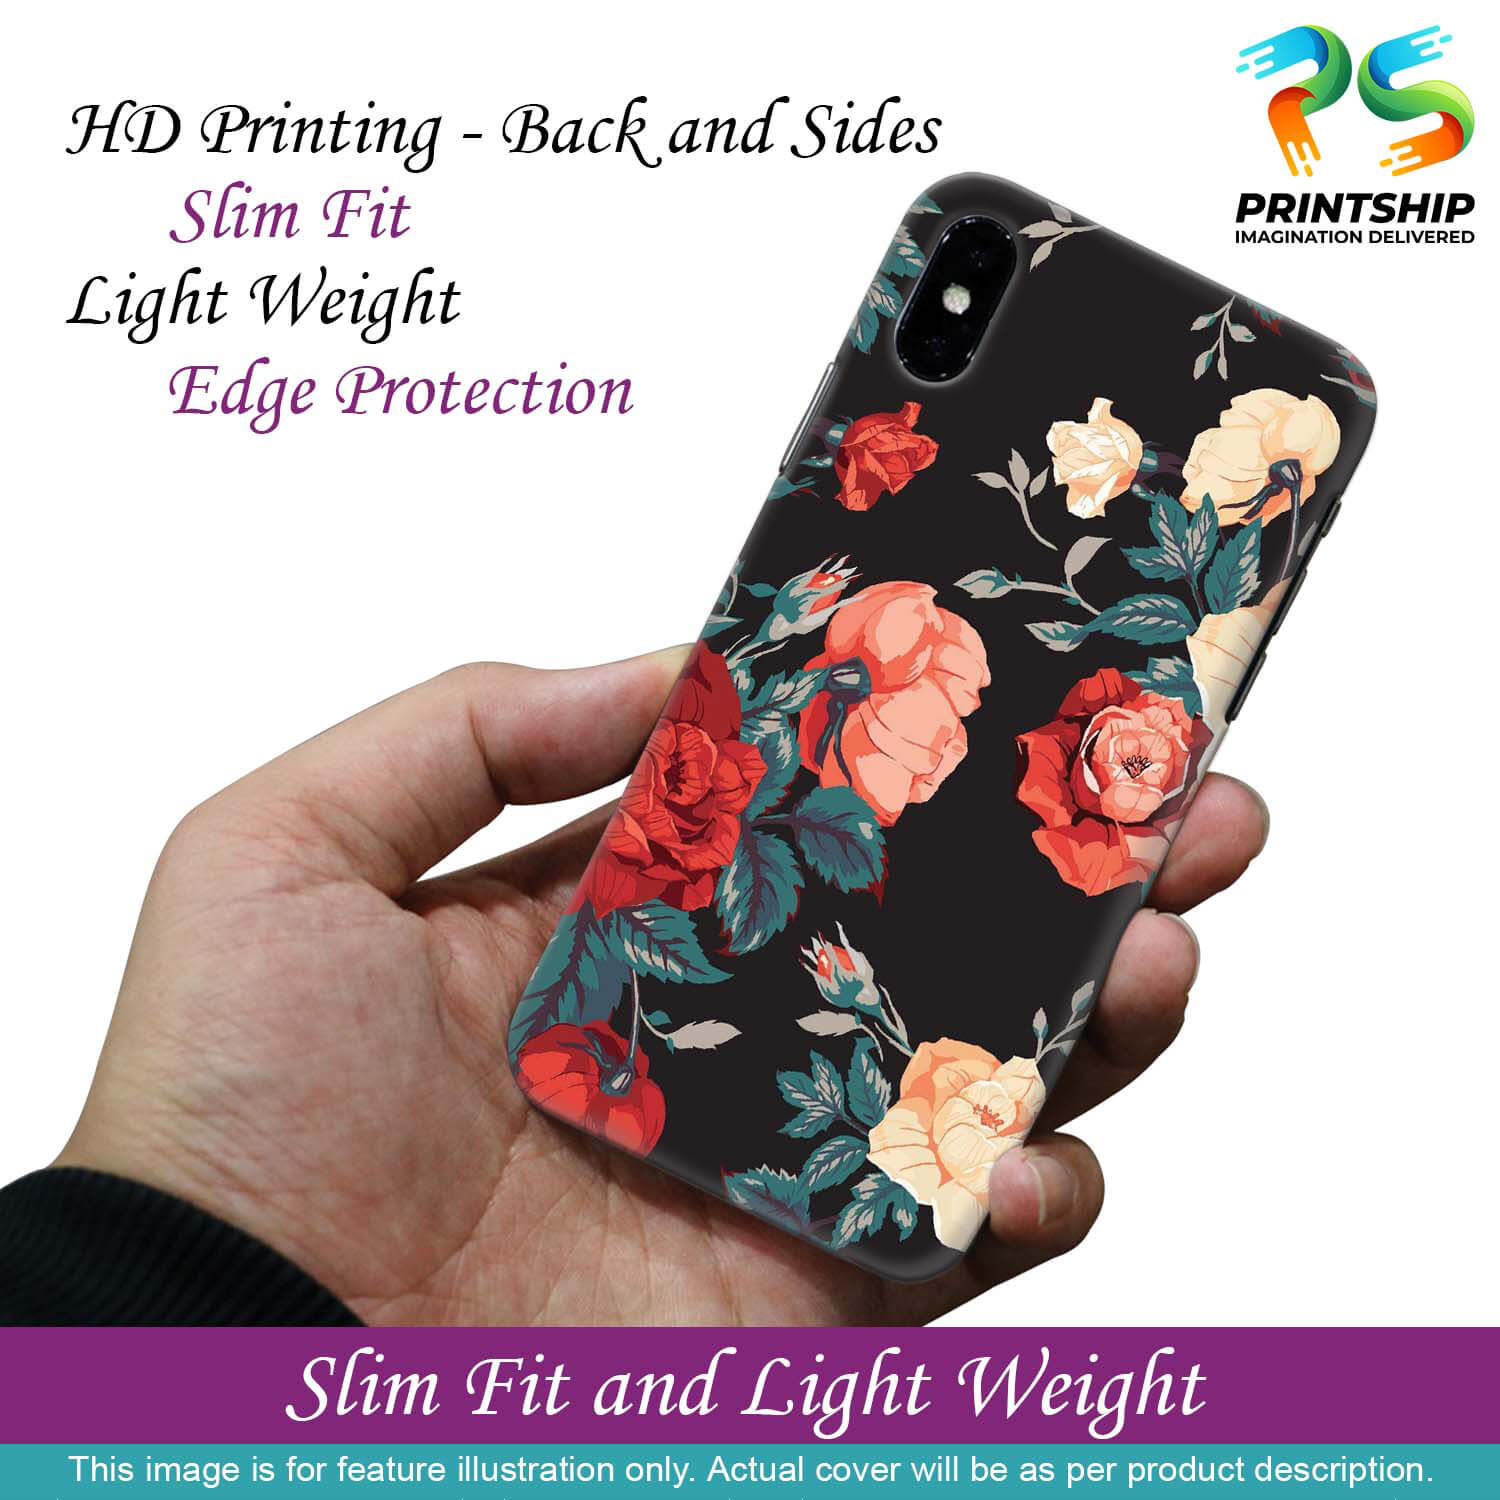 PS1340-Premium Flowers Back Cover for Realme 7 Pro